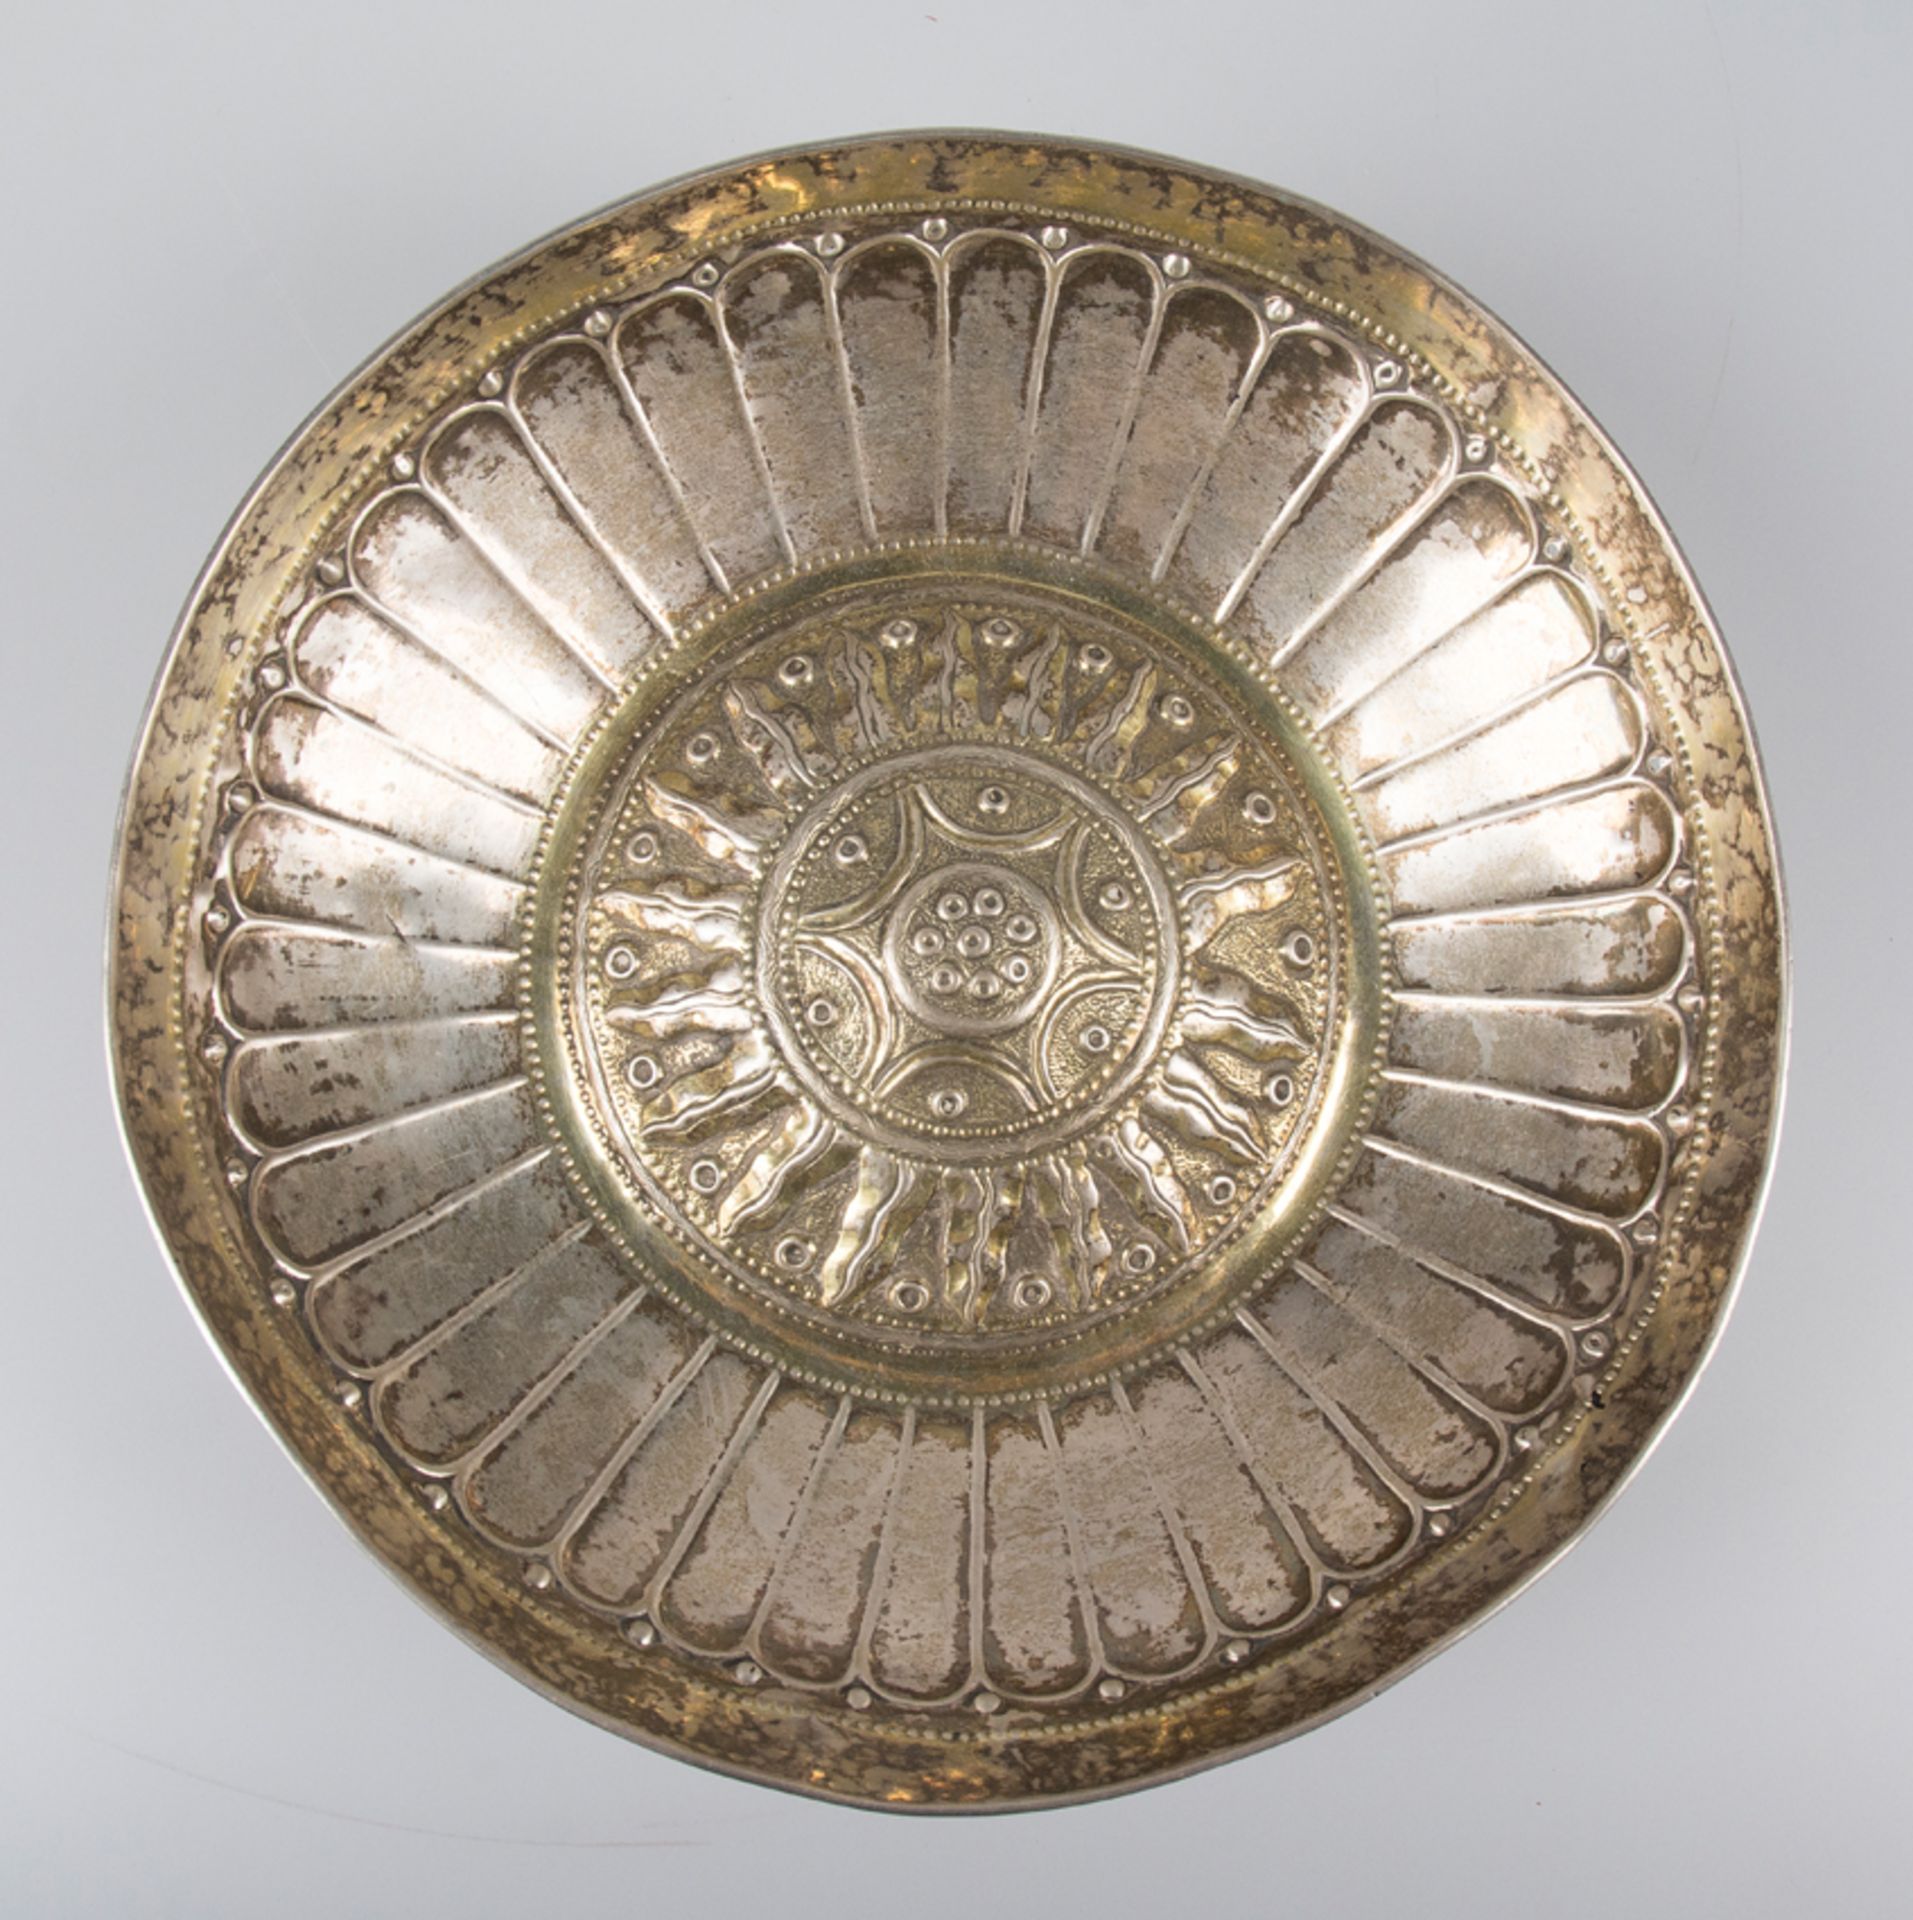 Embossed and chased silver tray with gilt residue. Possibly from Guatemala. 18th century. - Image 2 of 4